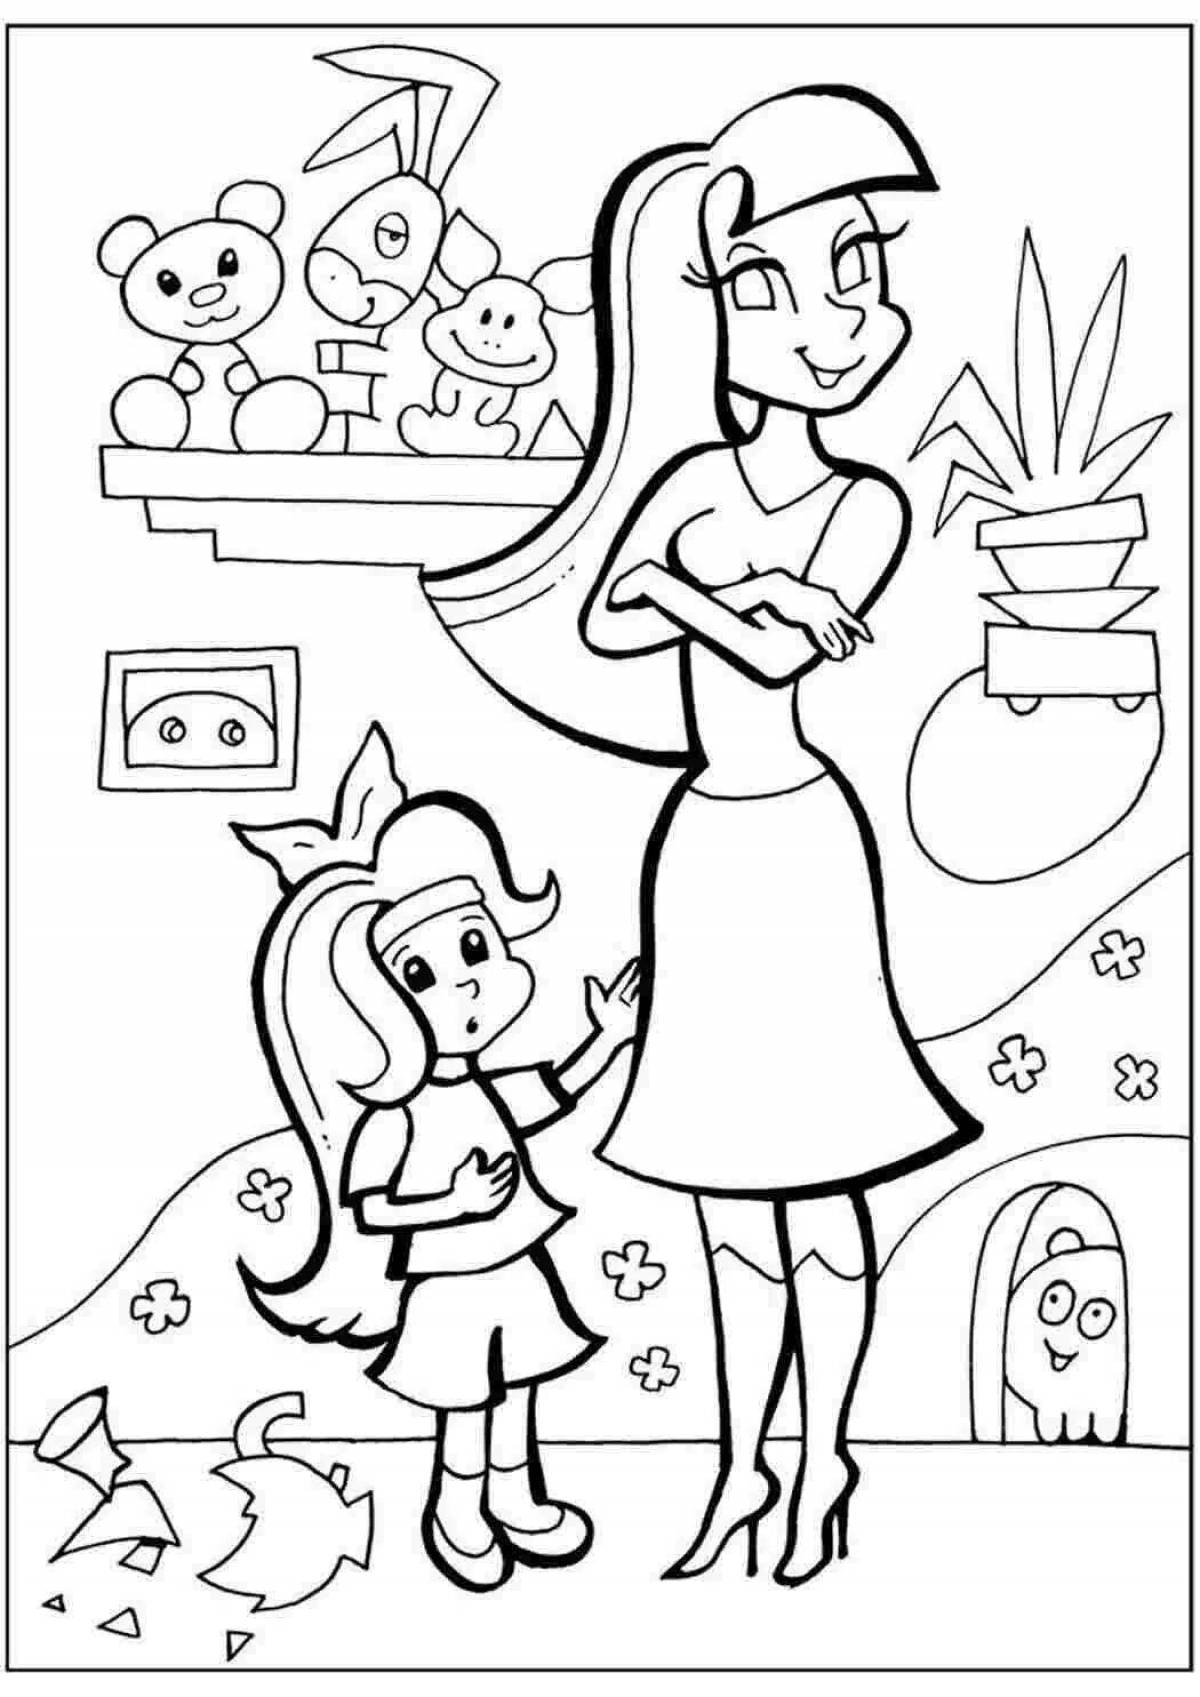 Charming mother and daughter coloring book